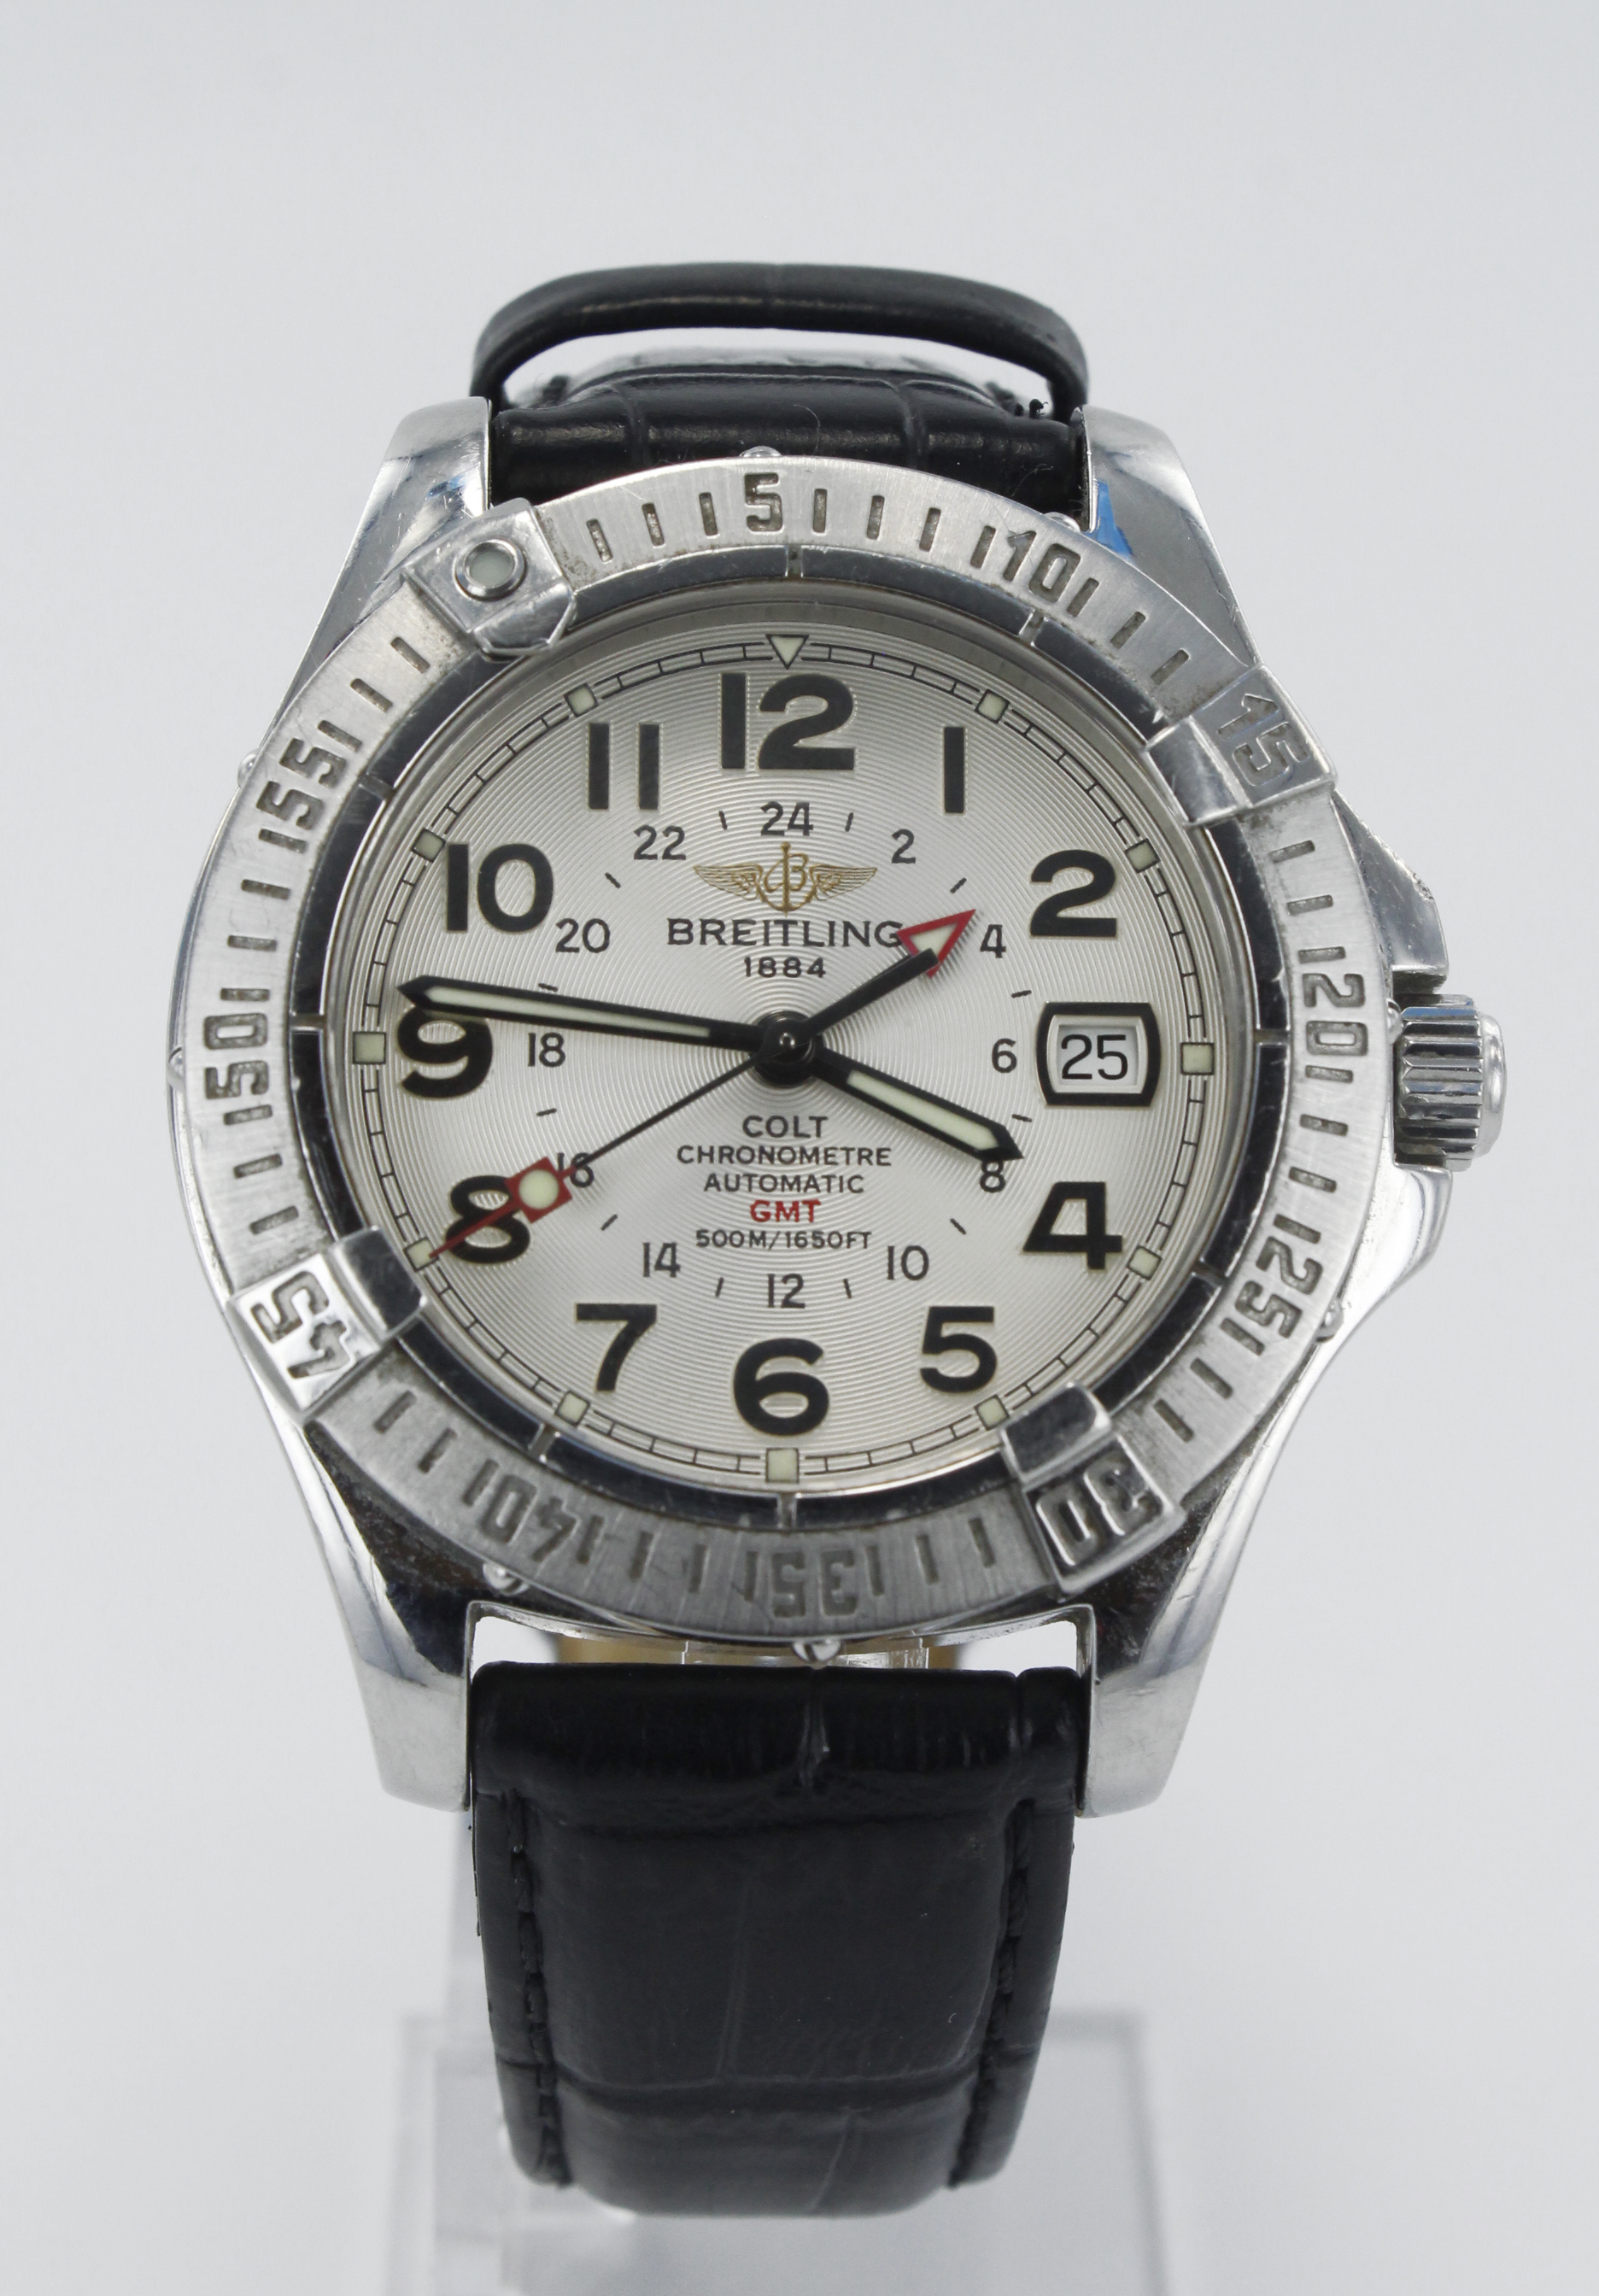 Breitling Colt GMT stainless steel cased gents automatic wristwatch, ref. A32350. The white dial